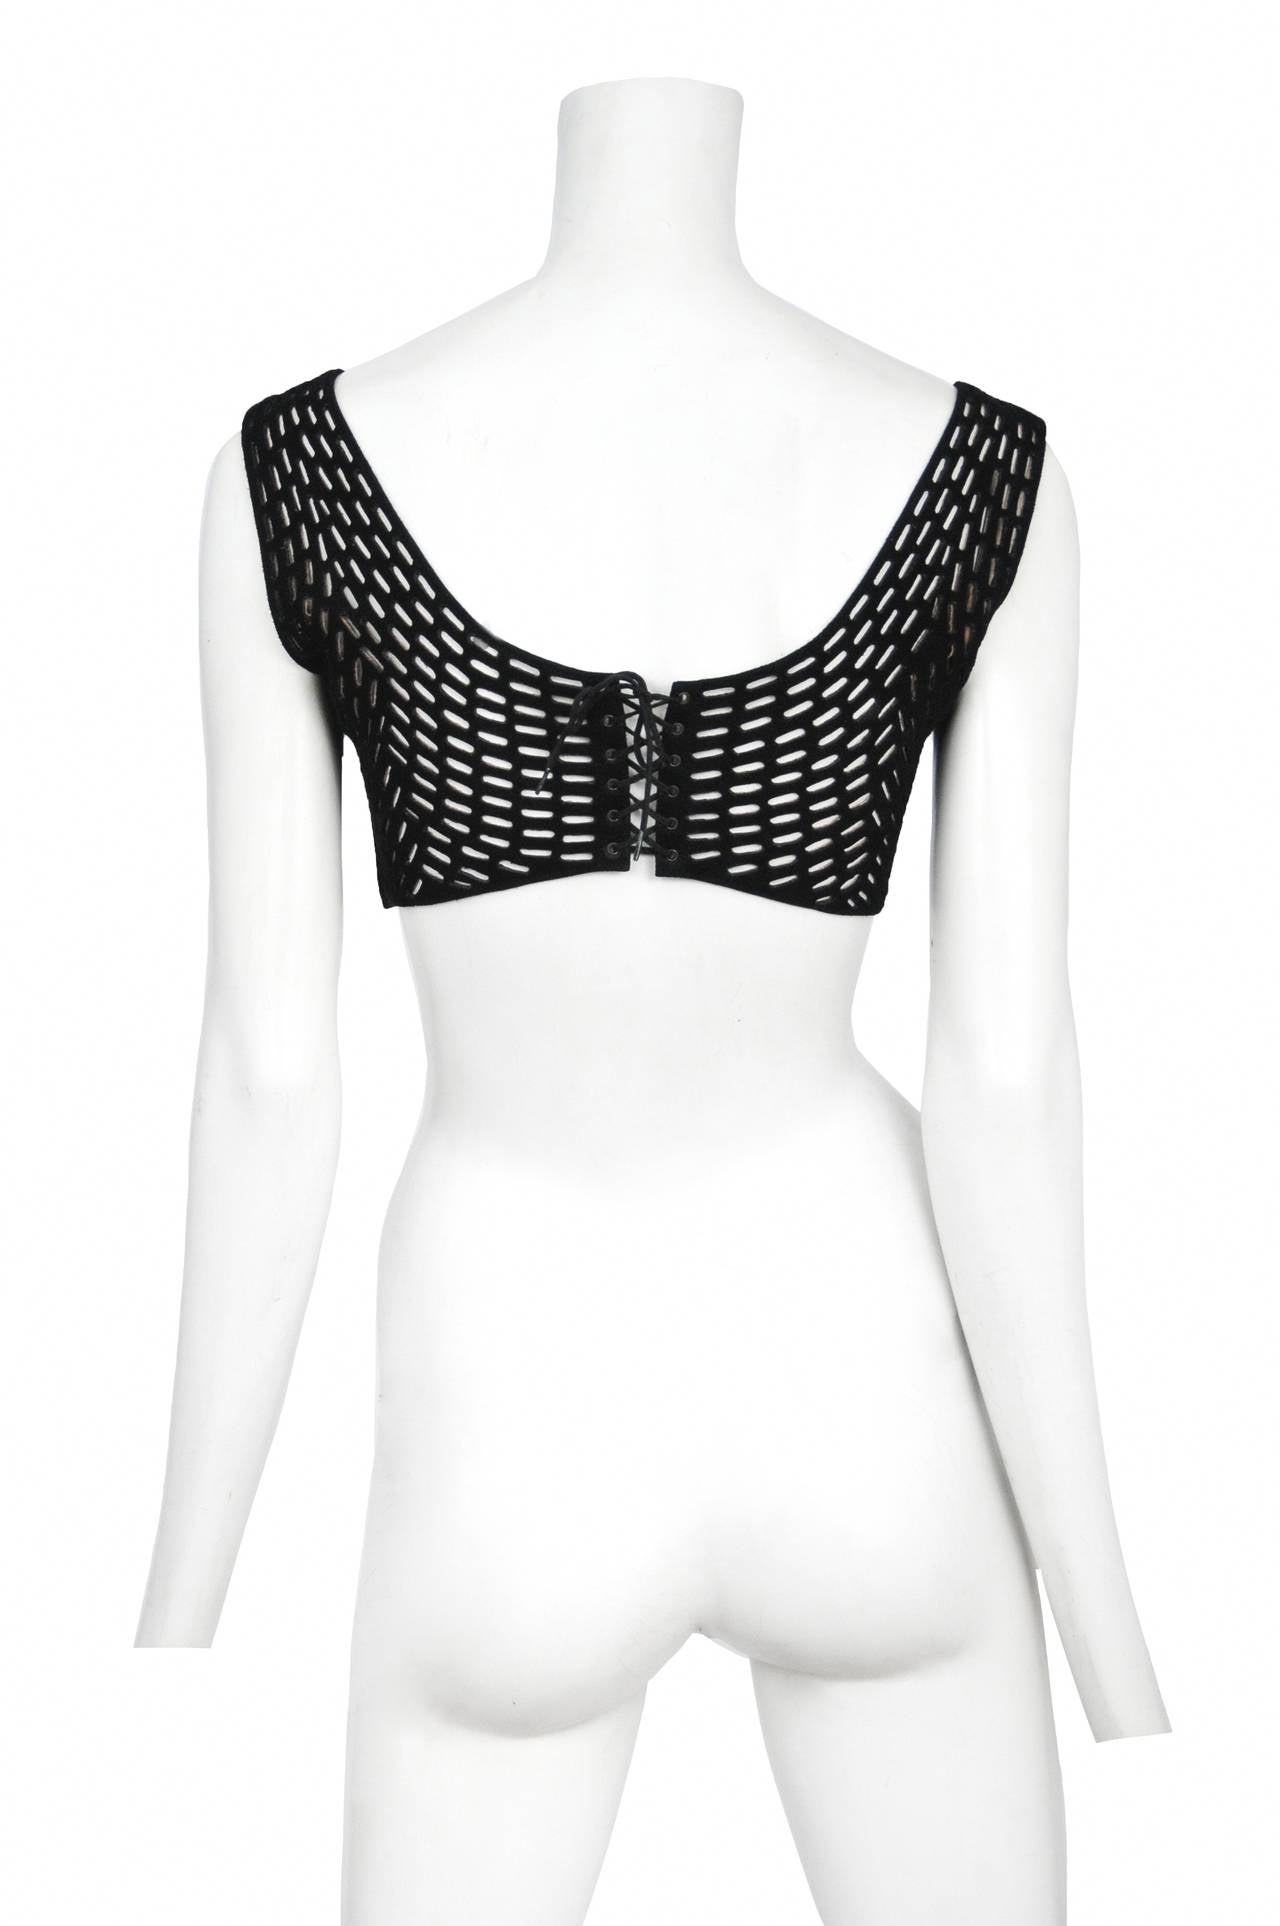 Vintage Azzedine Alaia black suede bra featuring an all over laser cutout design and lace up back.